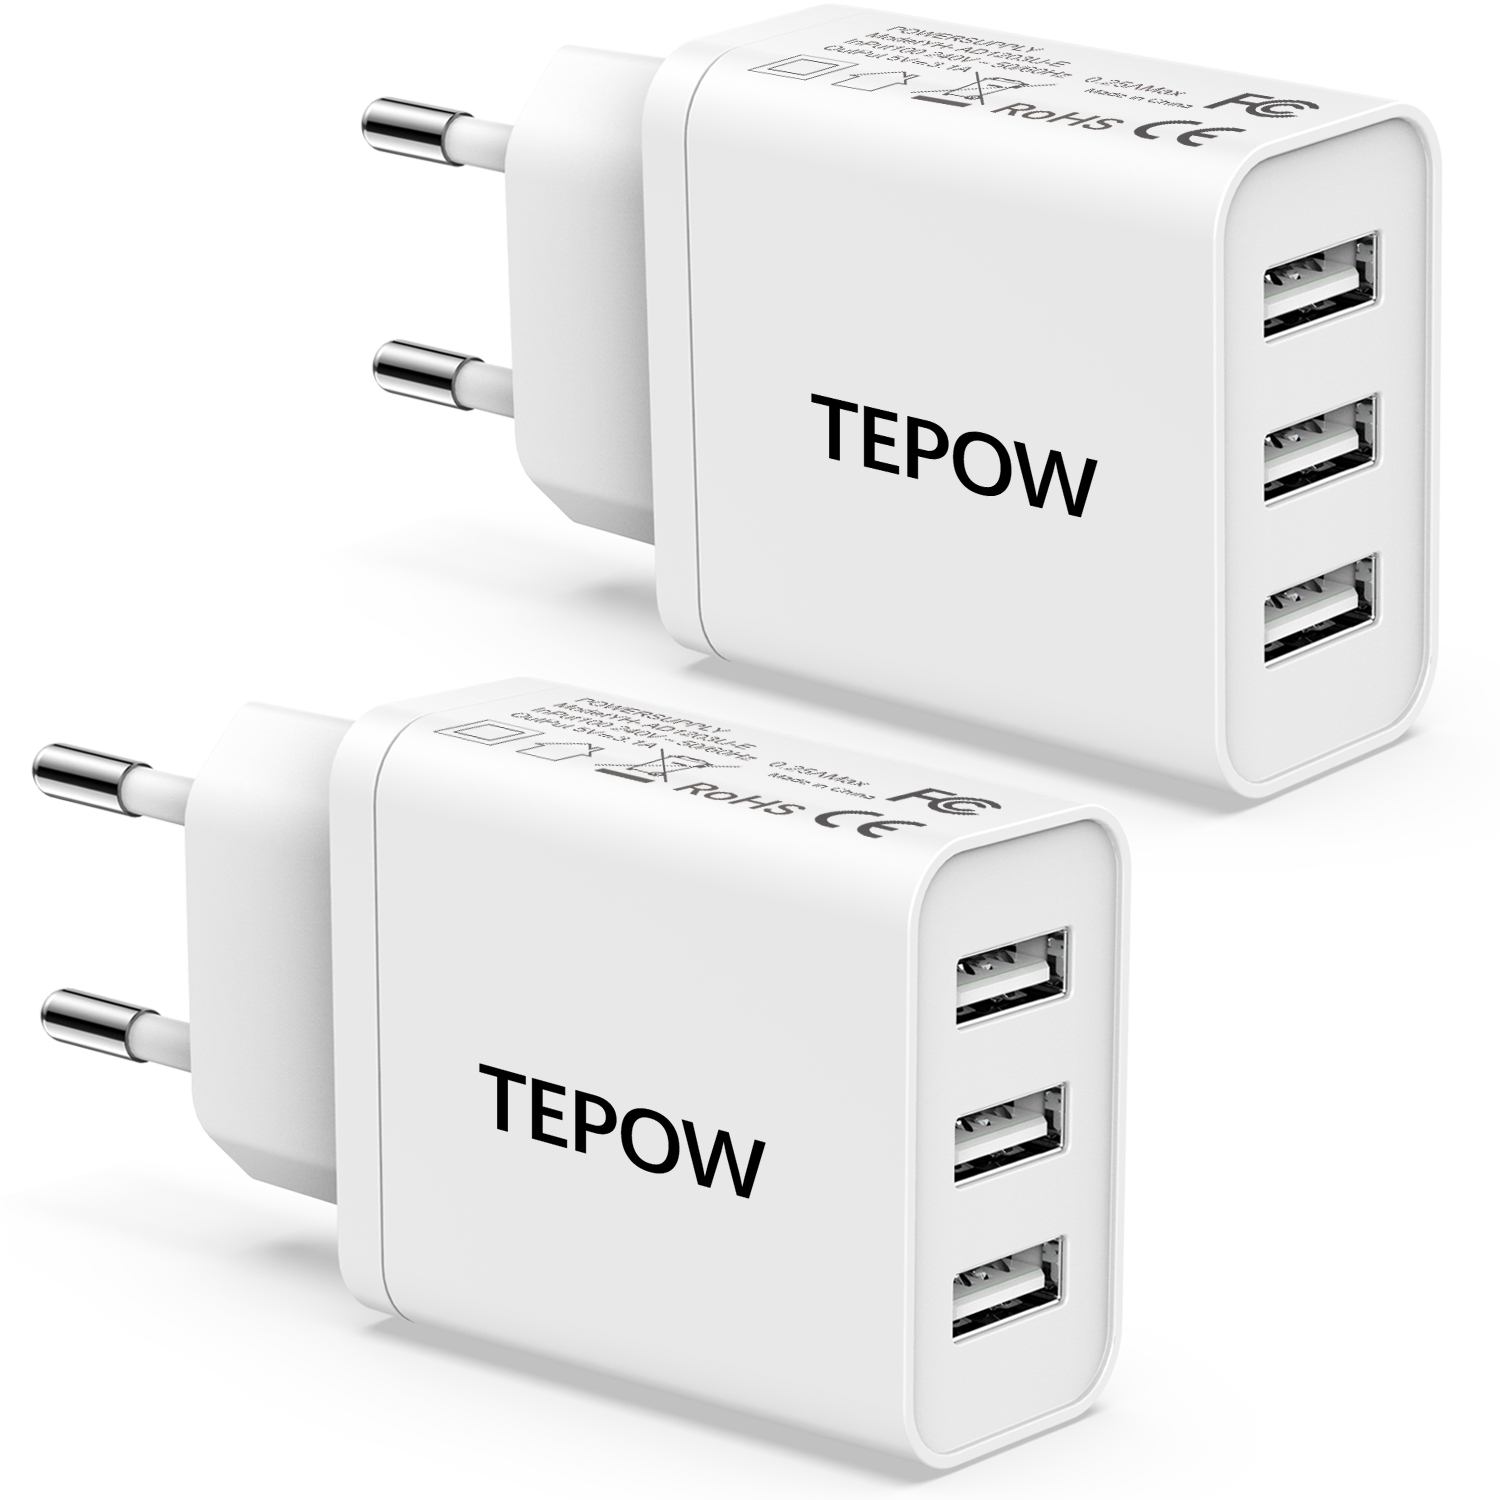 Chargeur USB Multiple,Prise USB Multiple 2Pack 15W/3A,Tepow 3 Port Prise Chargeur USB Adaptateur Prise Secteur USB Chargeur Telephone Universel pour Apple iPhone,Samsung Galaxy,Huawei,Xiaomi,Android